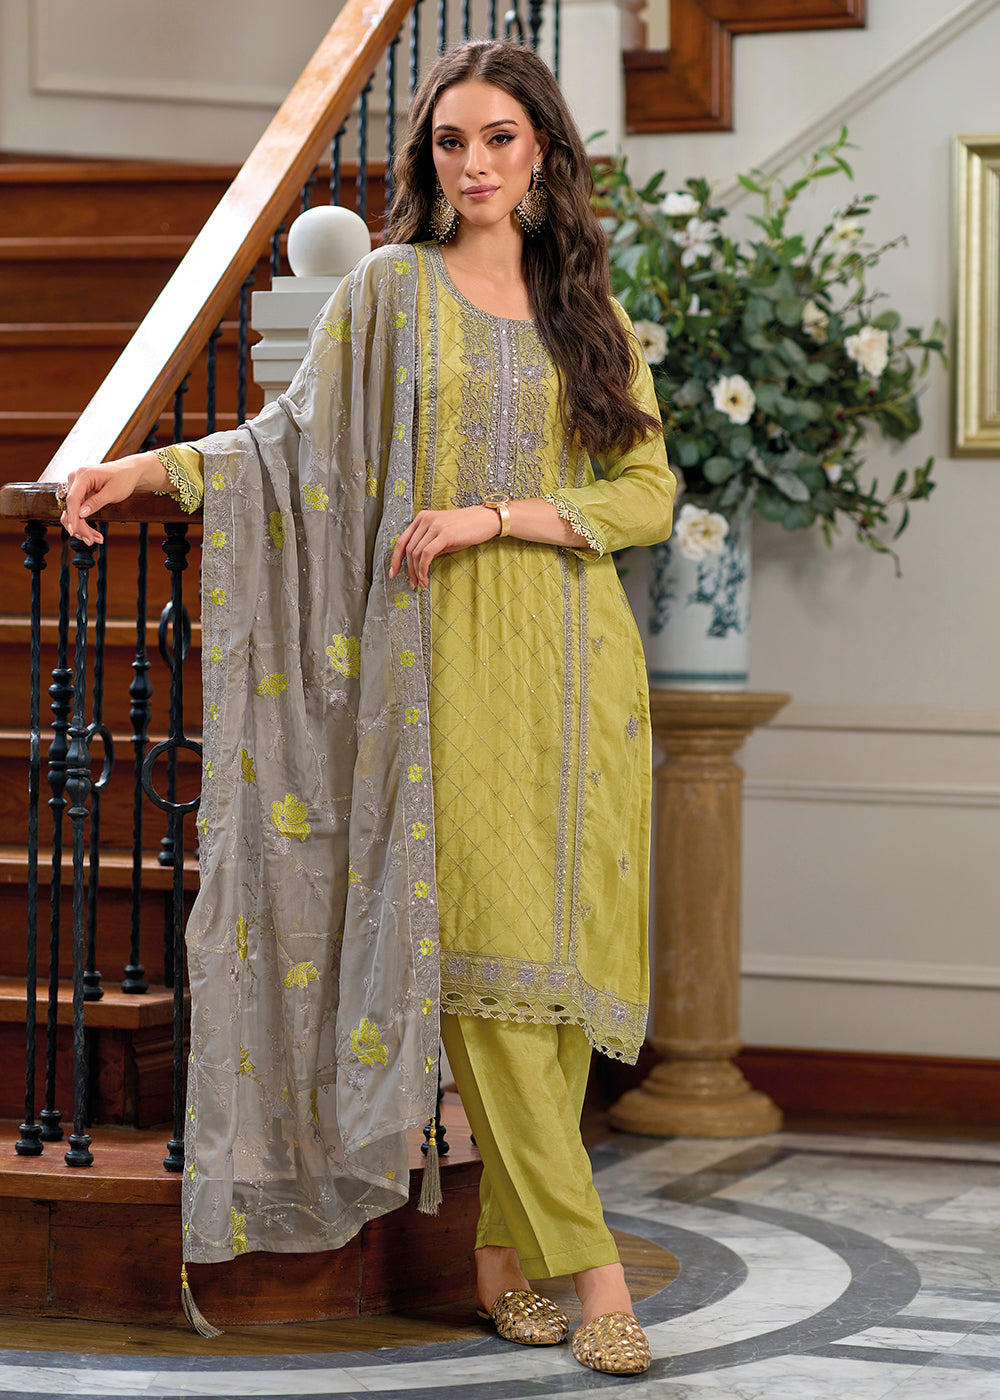 Buy Now Festive Organza Green Embroidered Salwar Kameez Online in USA, UK, Canada, Germany, Australia & Worldwide at Empress Clothing.